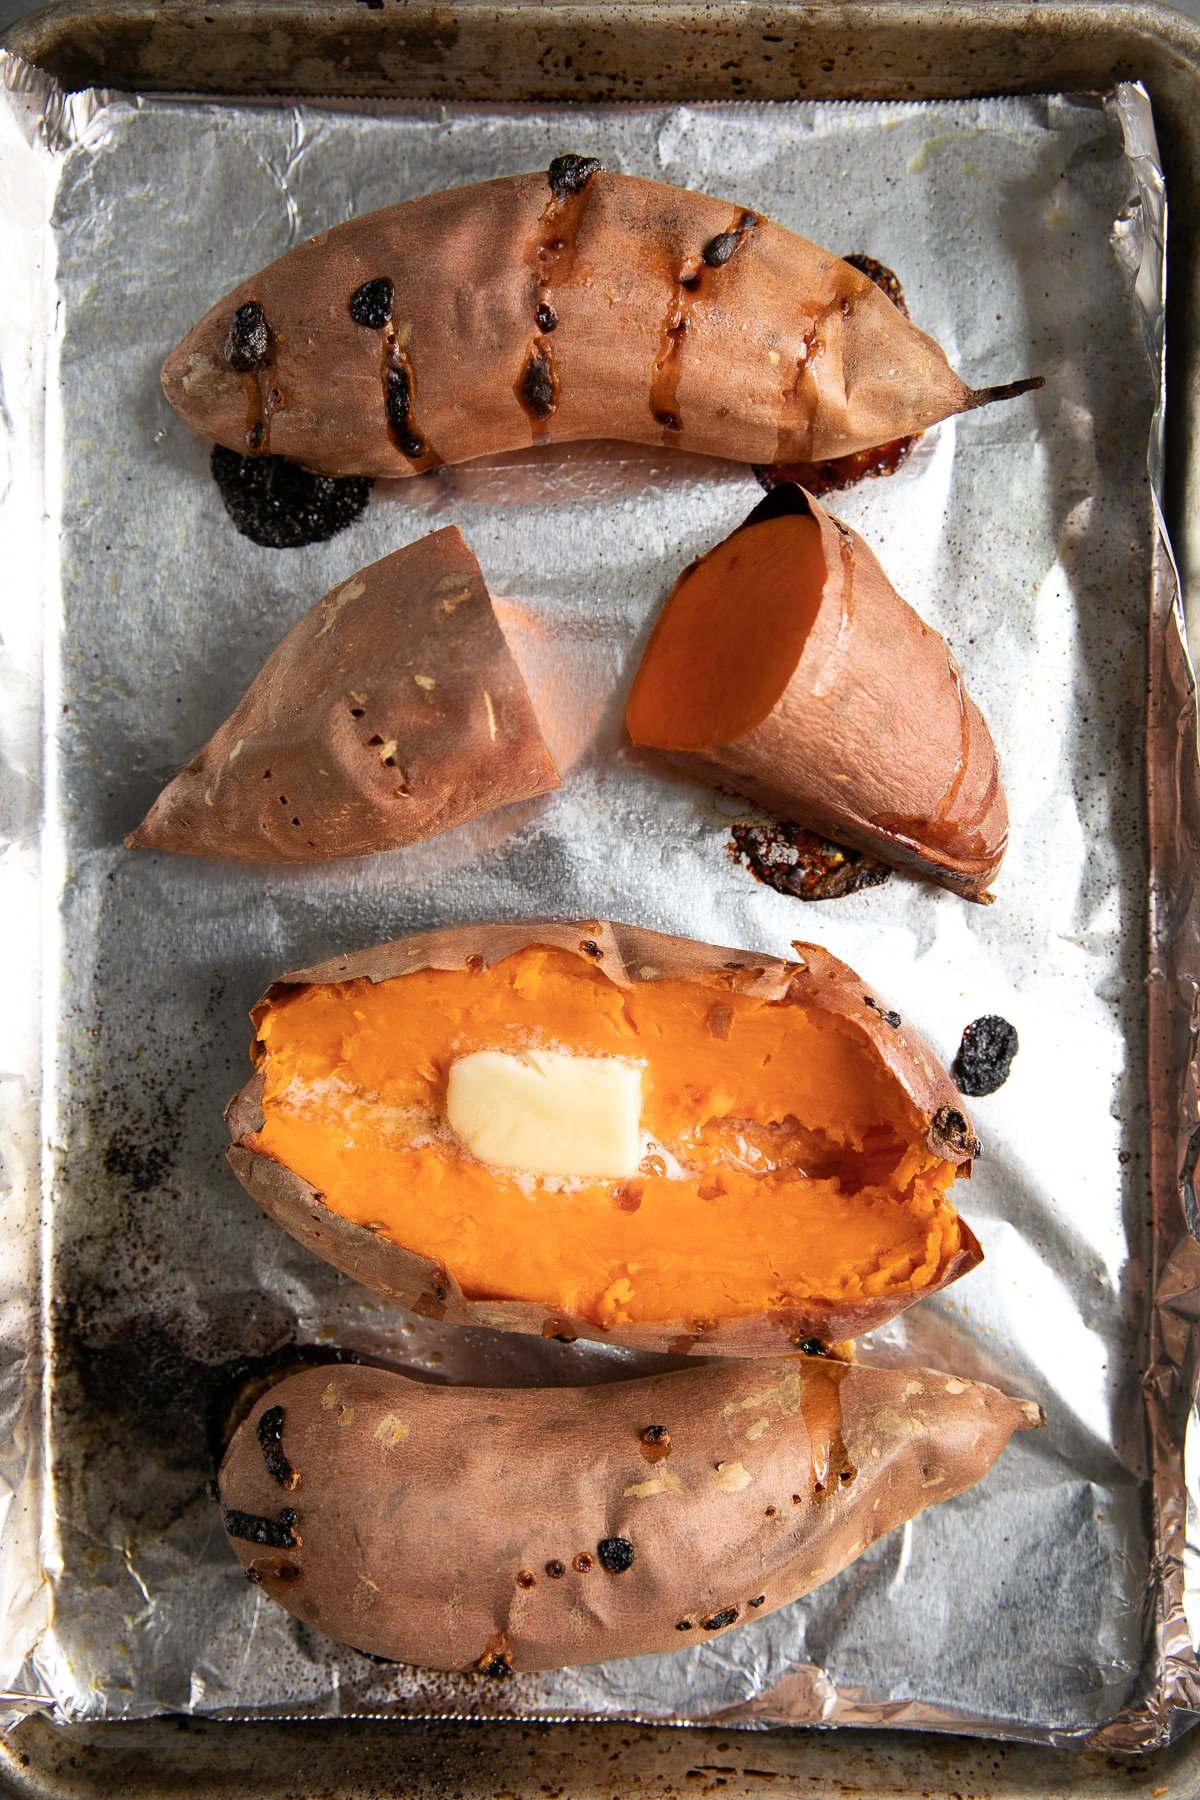 Four fully cooked sweet potatoes on a baking sheet lined with foil.